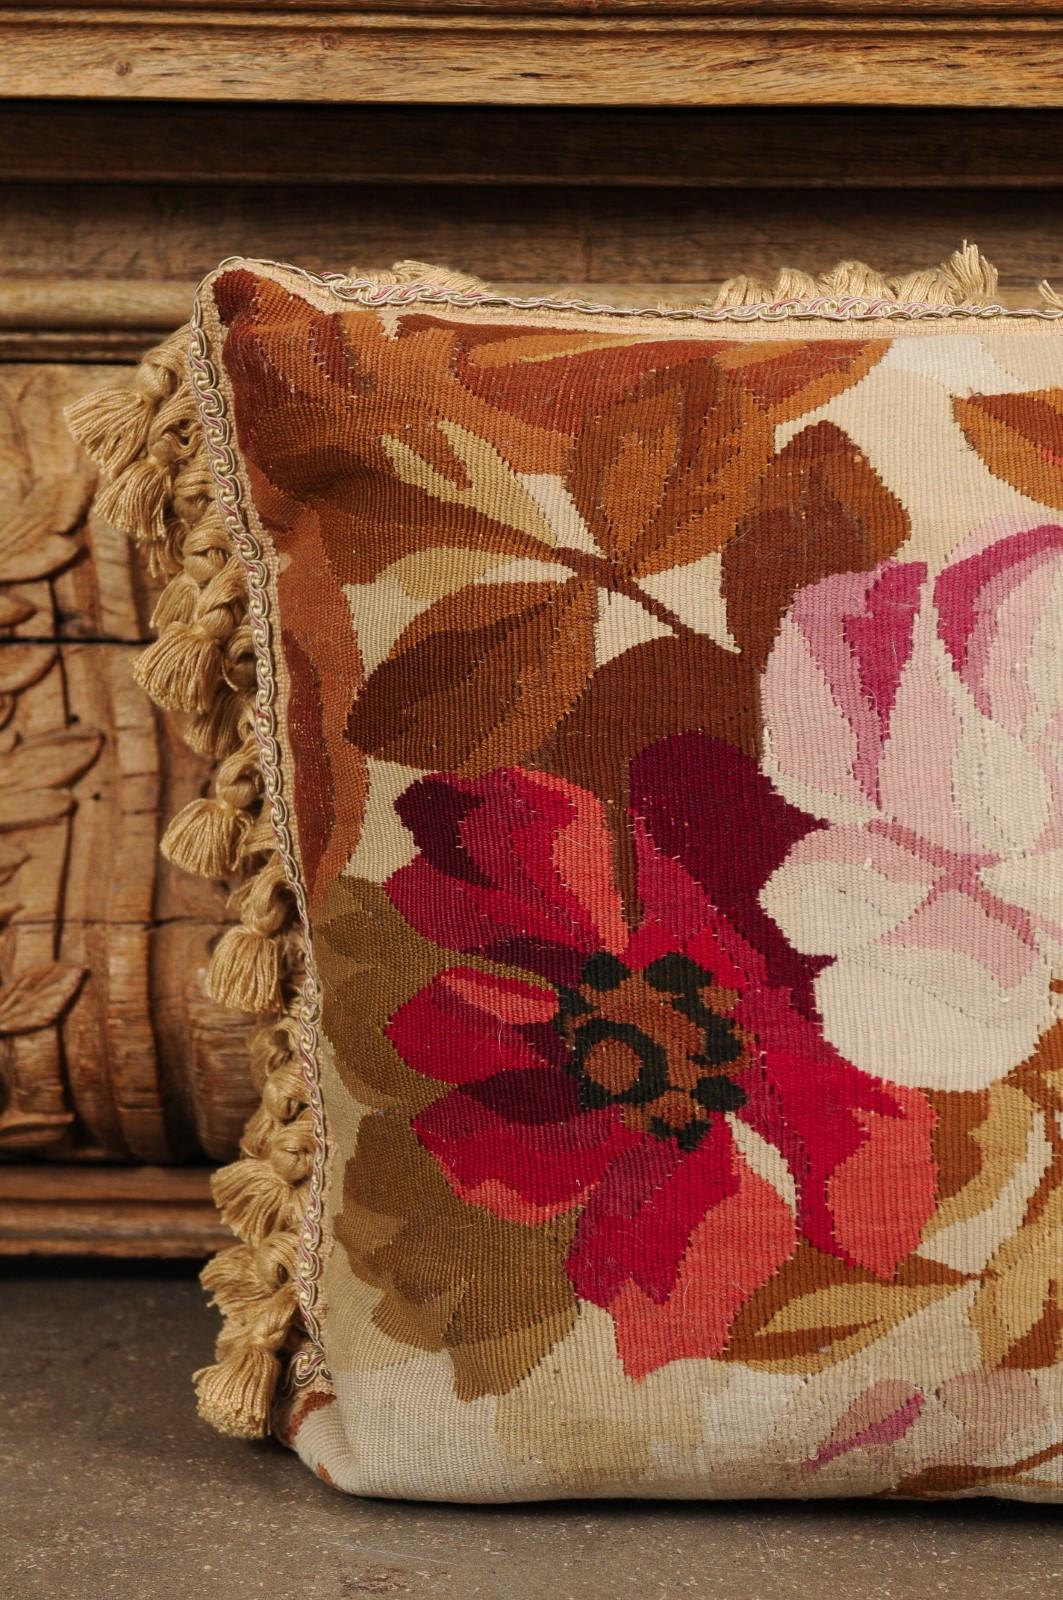 19th Century French Aubusson Woven Tapestry Pillow with Floral Décor and Tassels For Sale 6